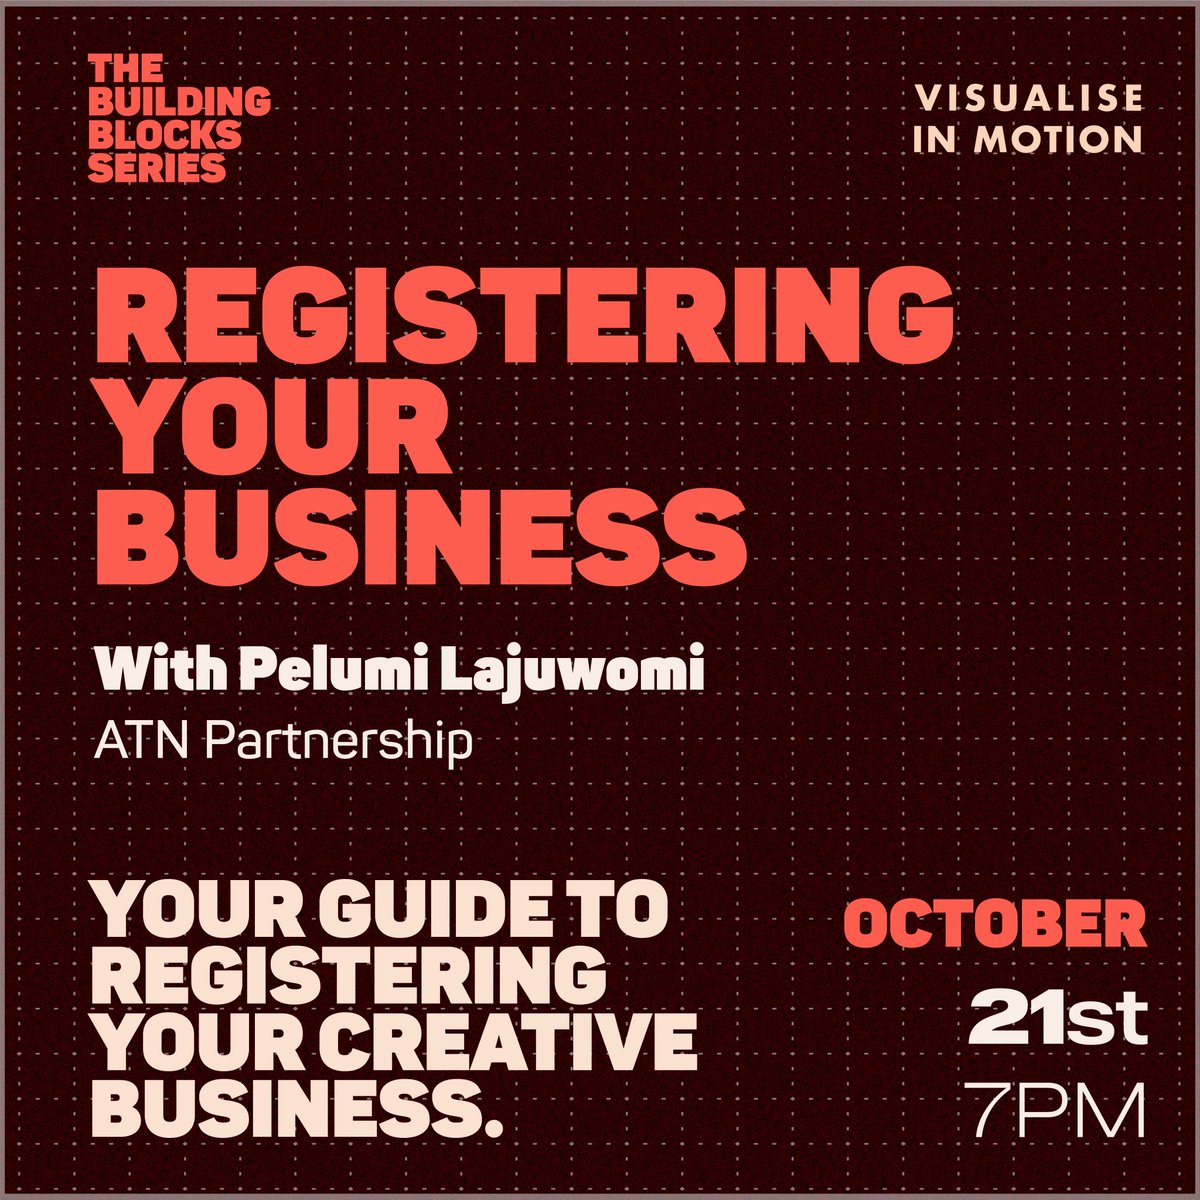 The first event is next Wednesday (Oct 21st @ 7pm) & it's all about 'Registering Your Business'. We want to make sure you understand that the way you register your business impacts how you operate your business. You can register for tickets here:  https://www.eventbrite.co.uk/e/122258880603 